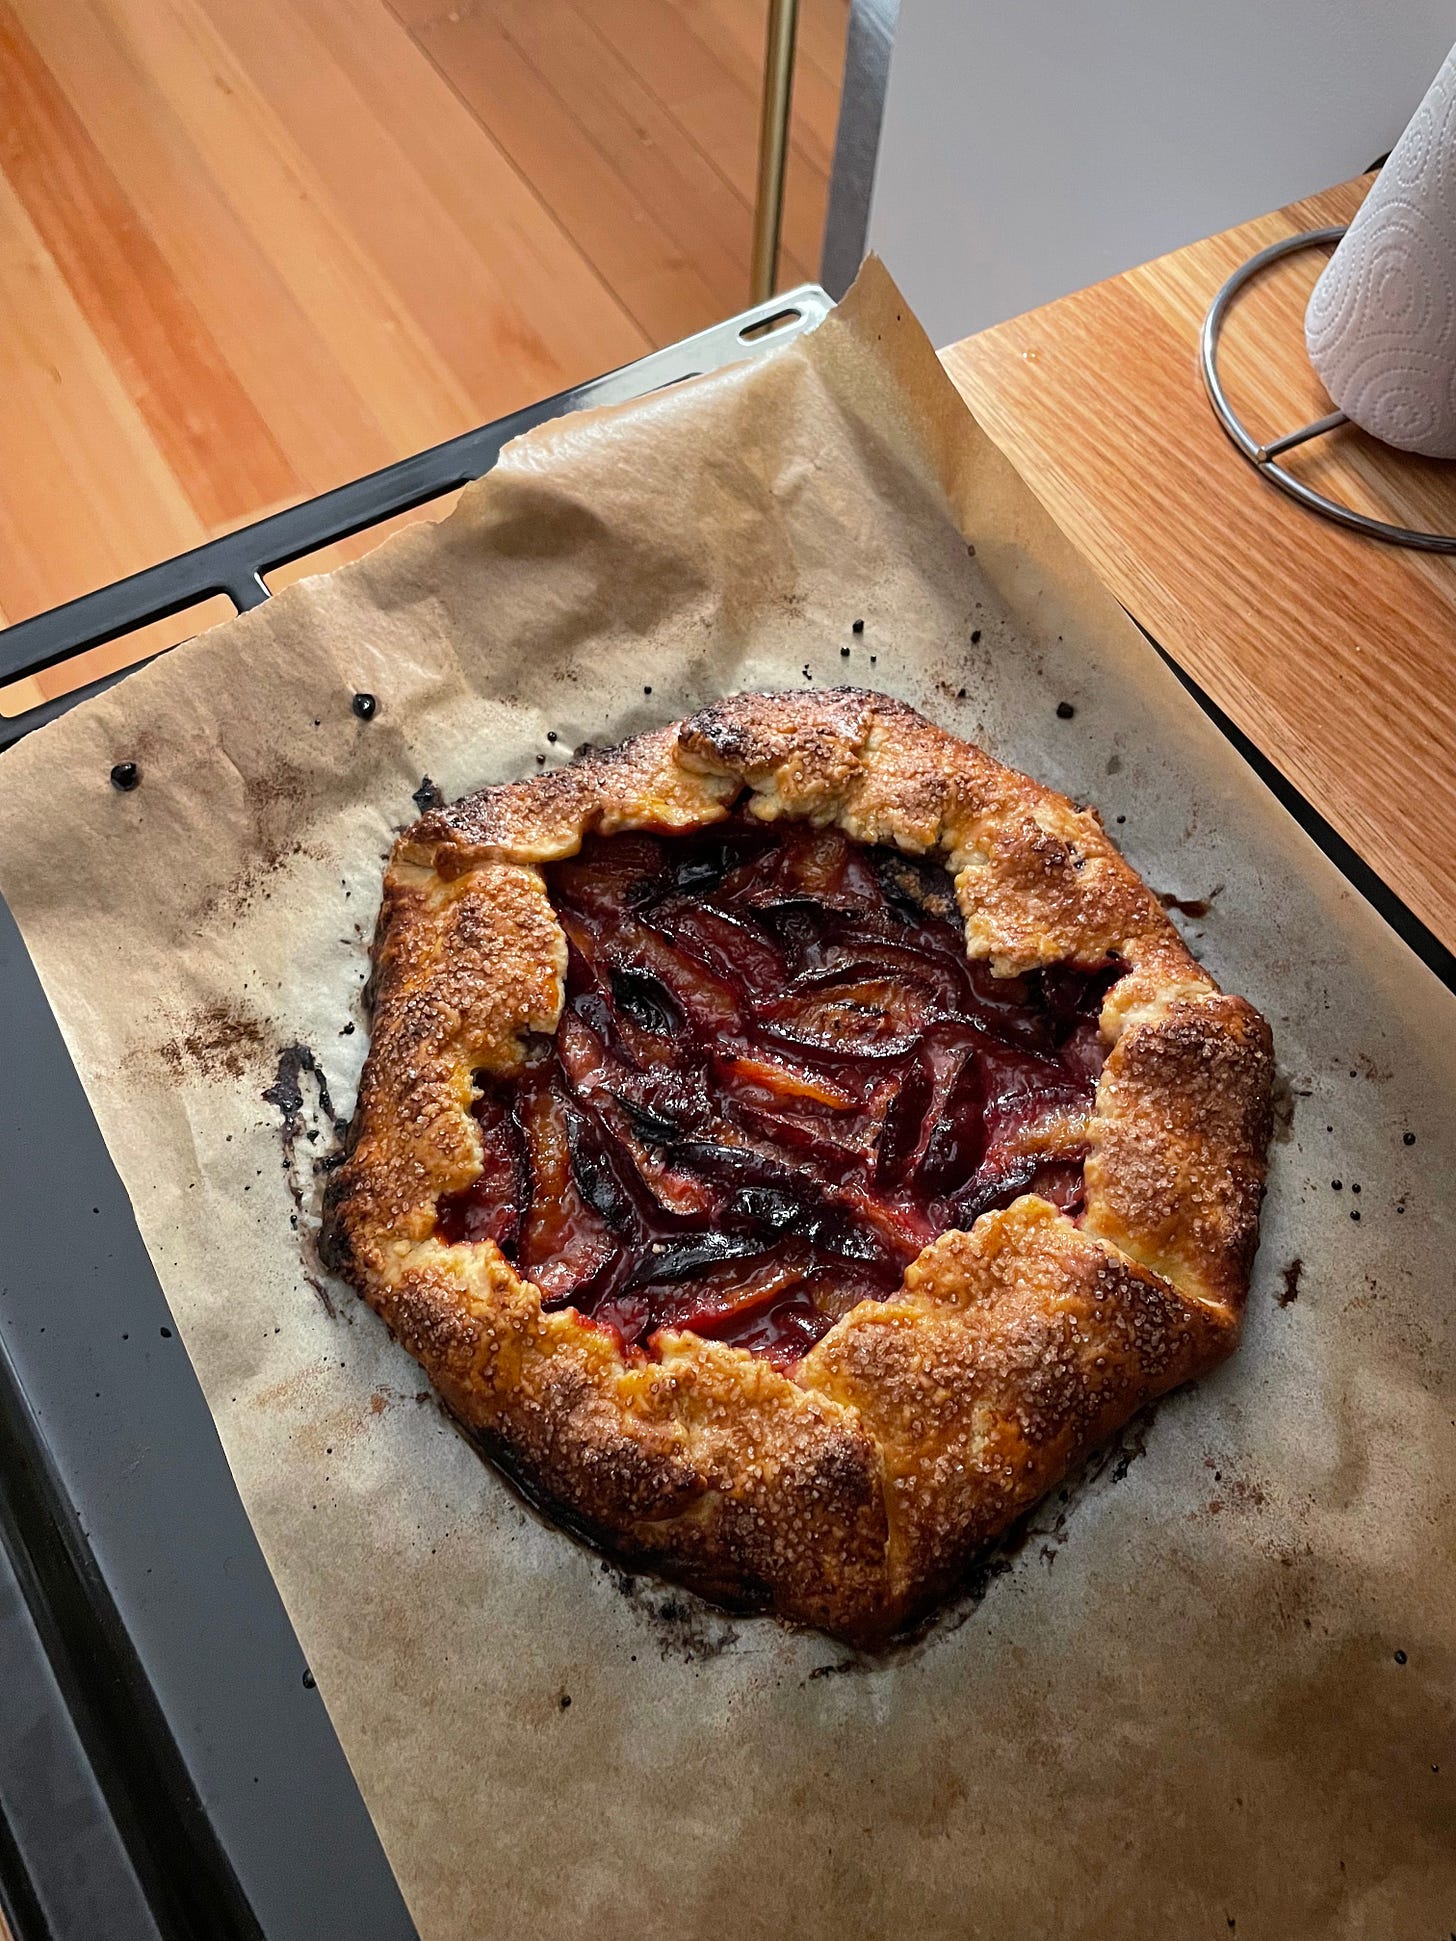 Plum and almond galette cooling on a kitchen counter.